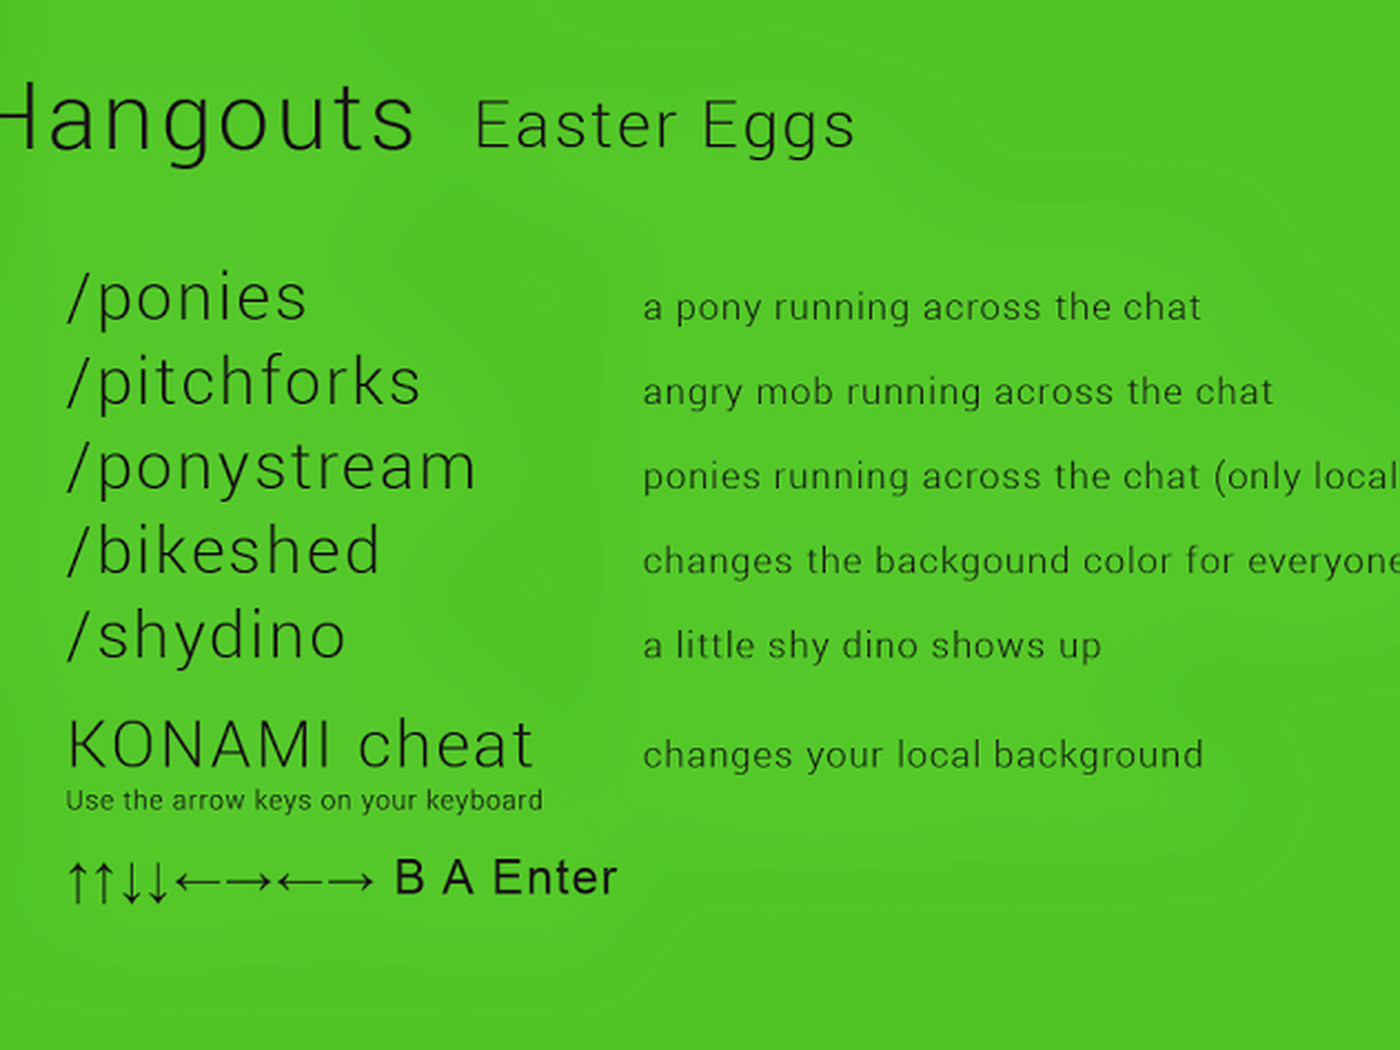 Google Hangouts Easter Eggs Include Shy Dinosaurs And Stampeding